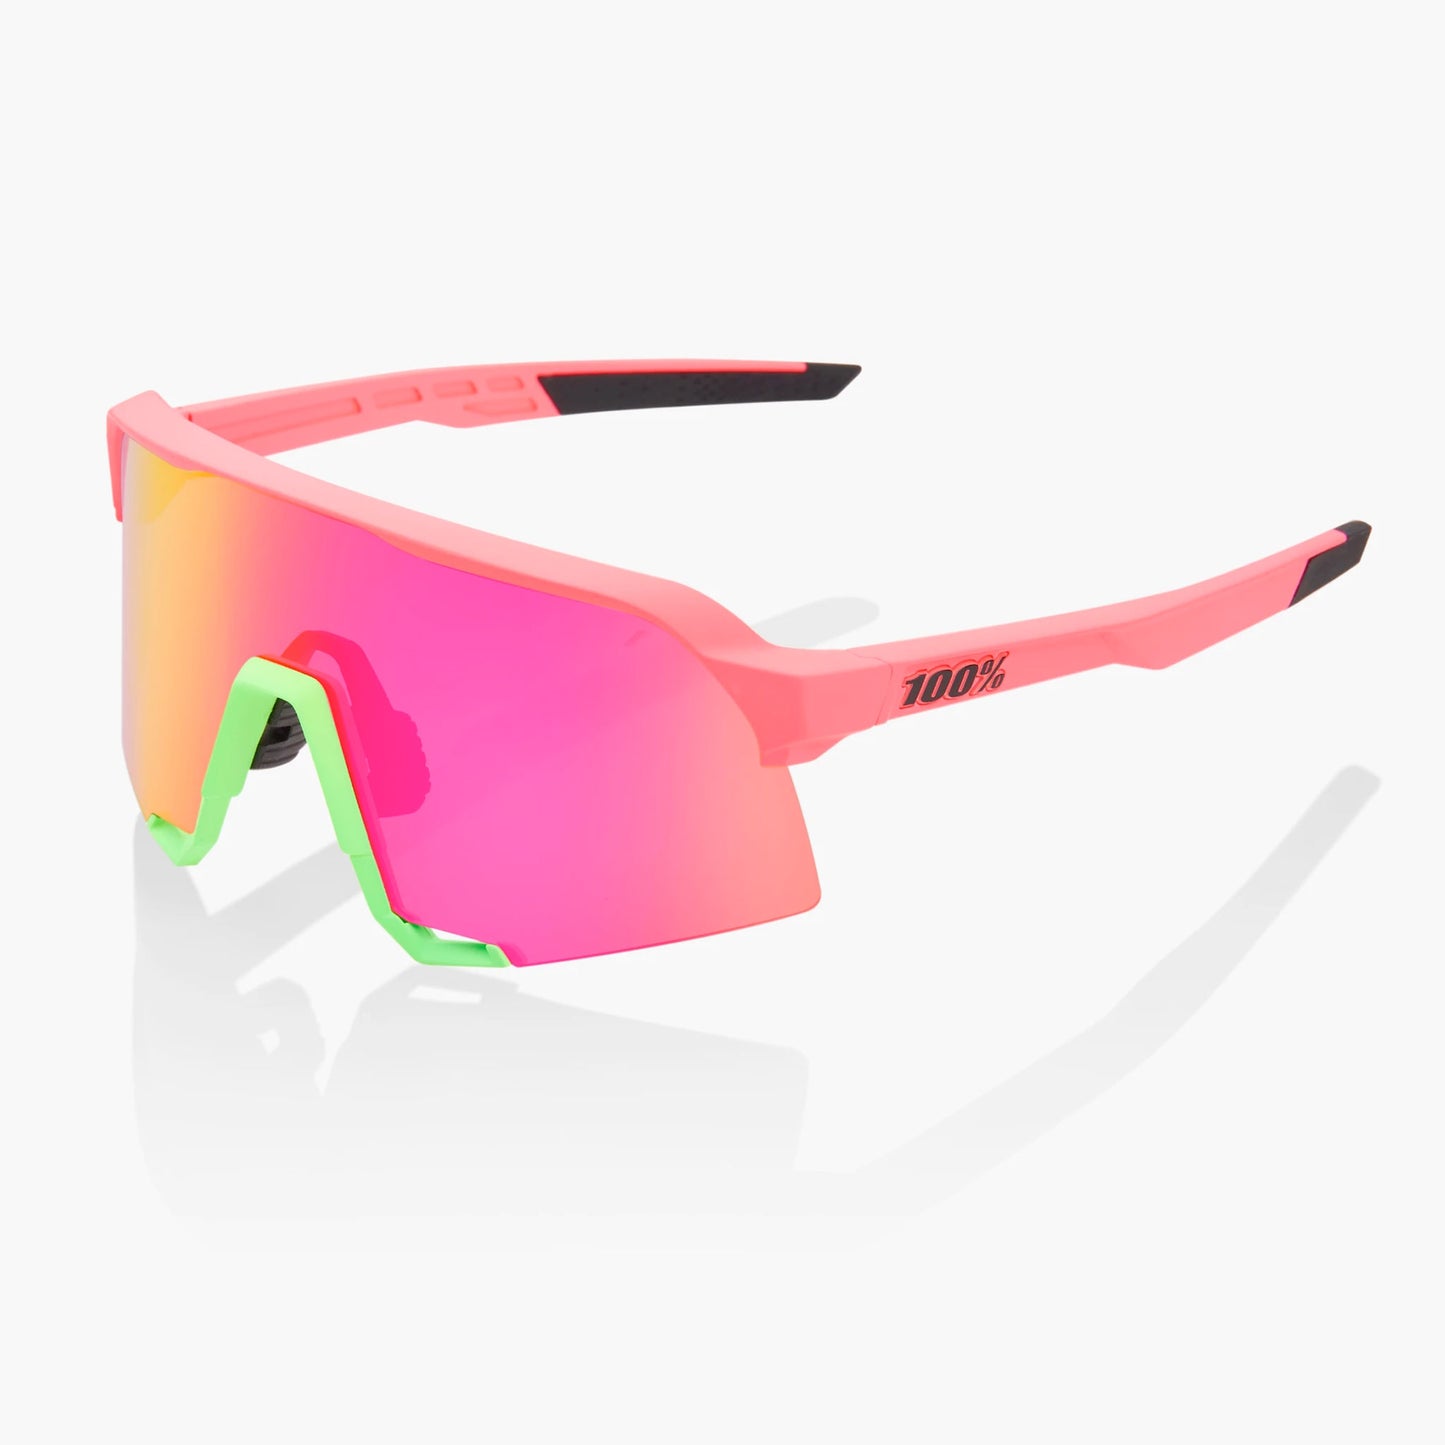 100% S3 Cycling Sunglasses - Matt Washed Out Neon Pink With Purple Multilayer Mirror Lens + Clear lens buy niow at Woolys Wheels bike shop Sydney